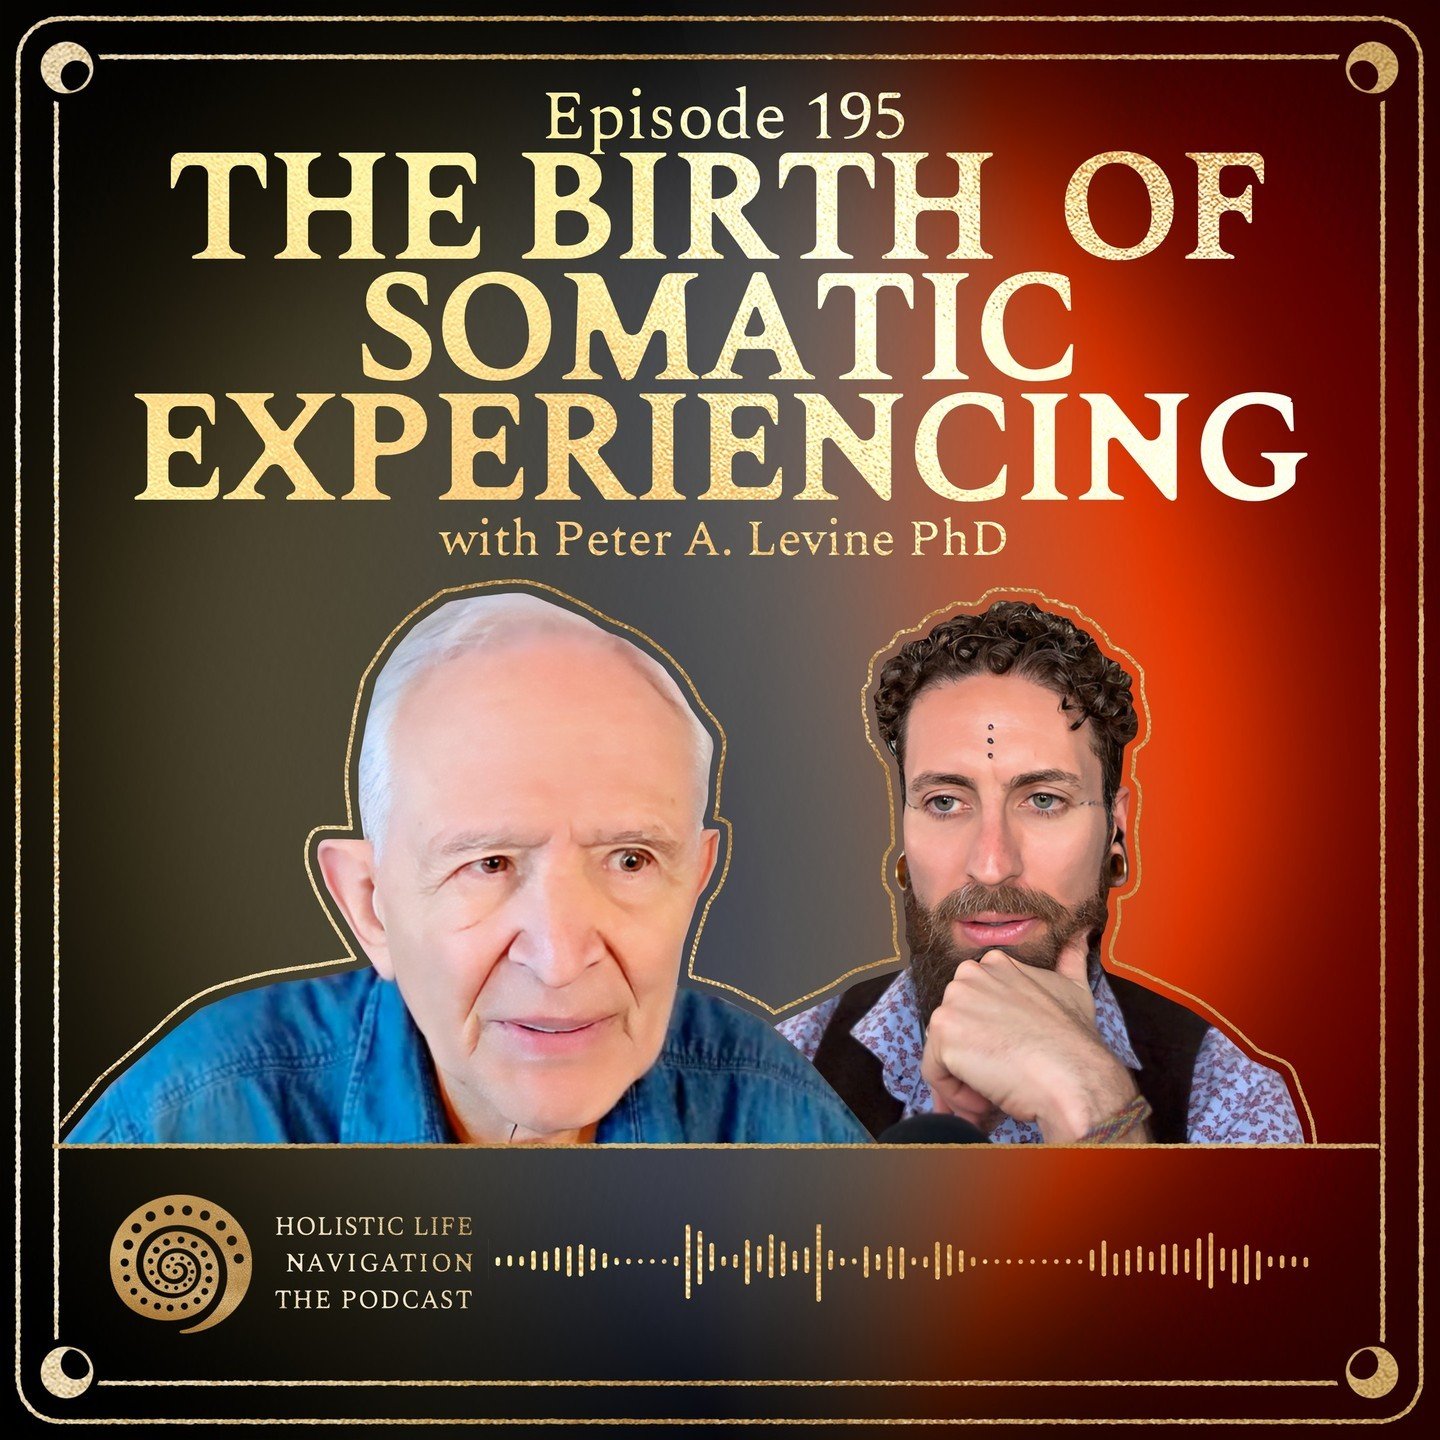 On today's episode Luis is joined by Peter A. Levine (@drpeterealevine), PhD: psychotherapist, author, and creator of Somatic Experiencing.⁠
⁠
They discuss:⁠
⁠
&middot; How their personal histories have shaped their lives and work⁠
&middot; The impor